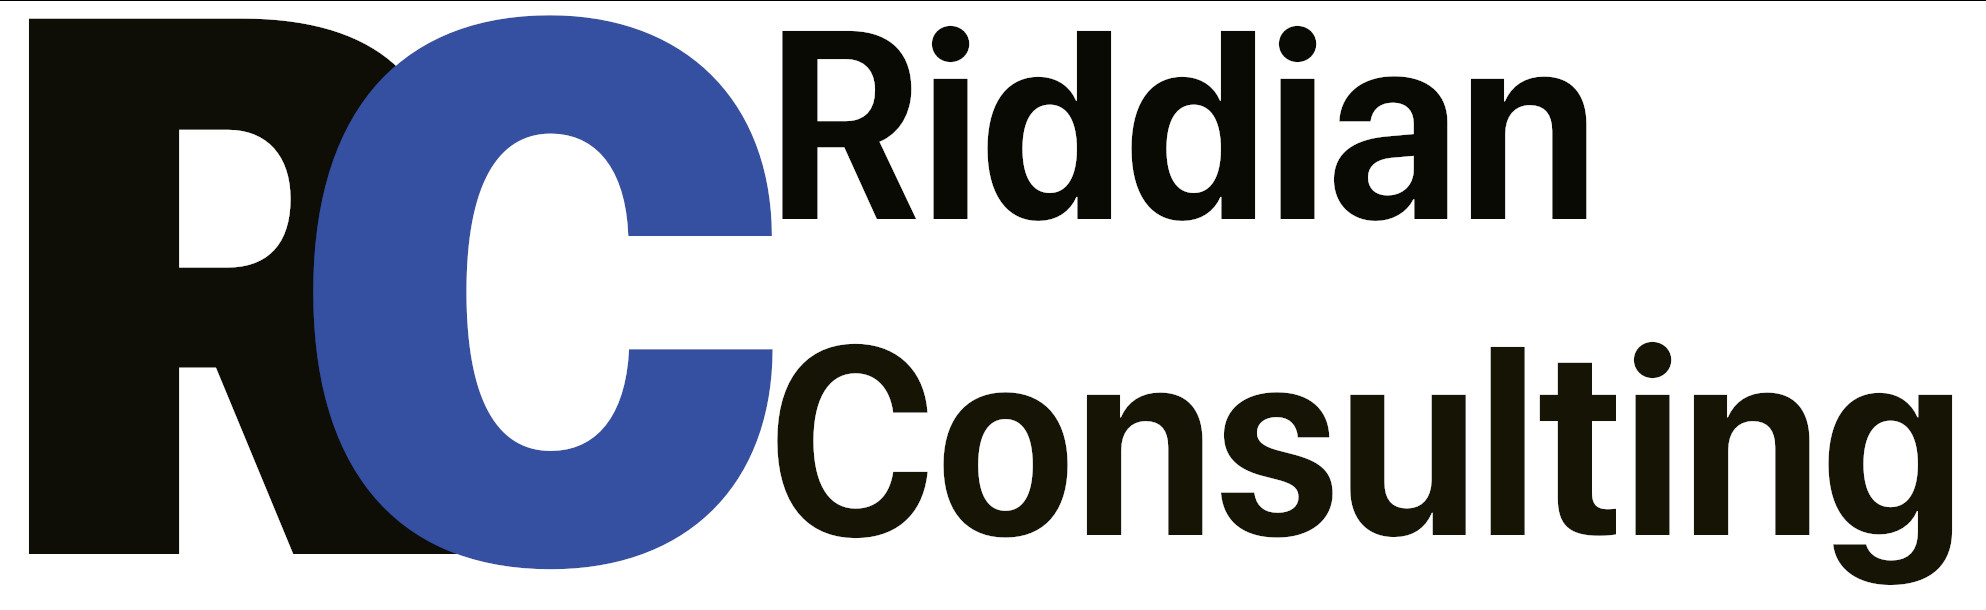 Riddian Consulting